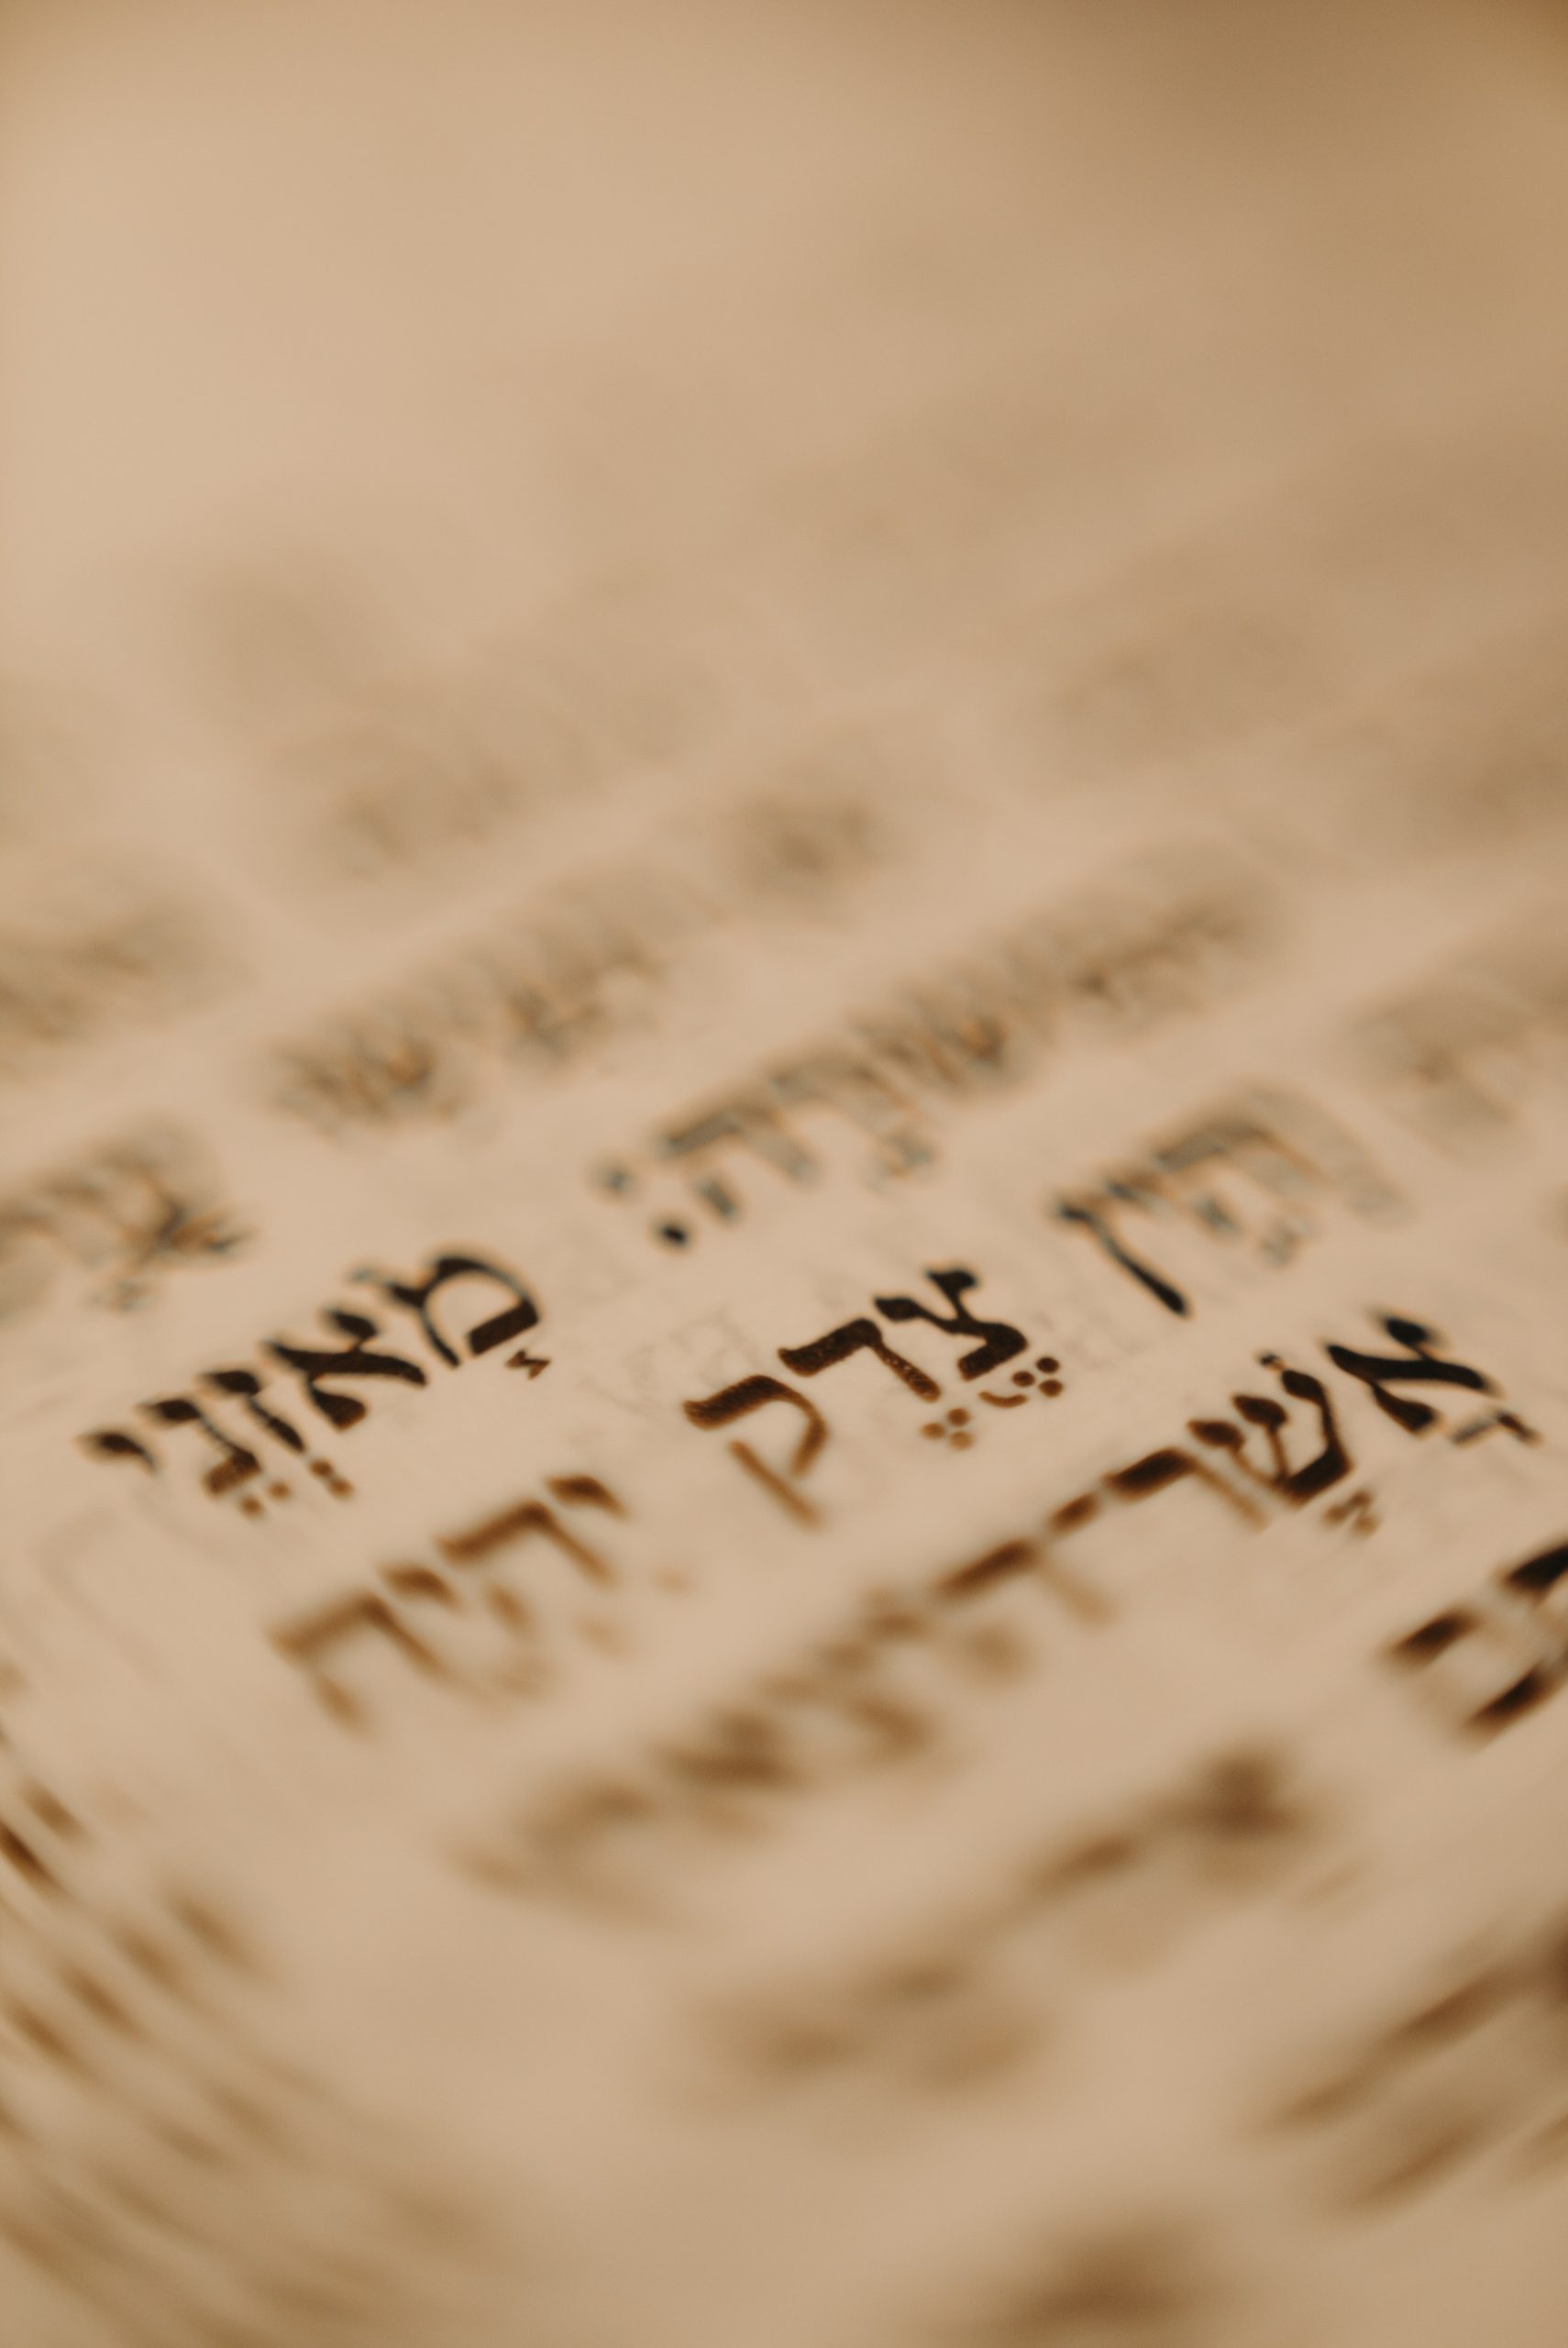 Timely Torah: Insights from the Weekly Torah Portion